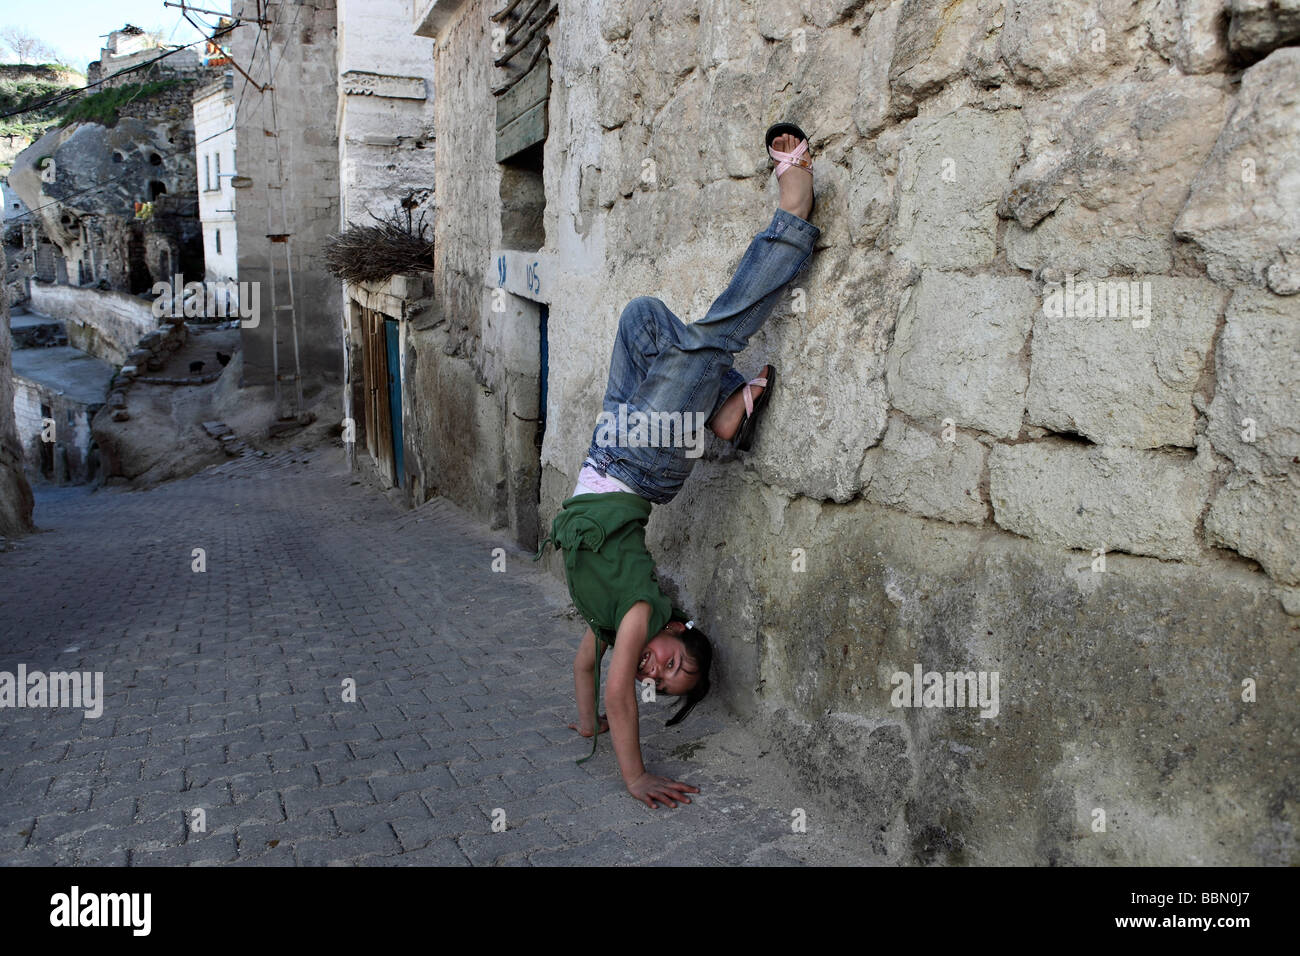 Teenager contorts herself with a funny pose in a remote village. Stock Photo